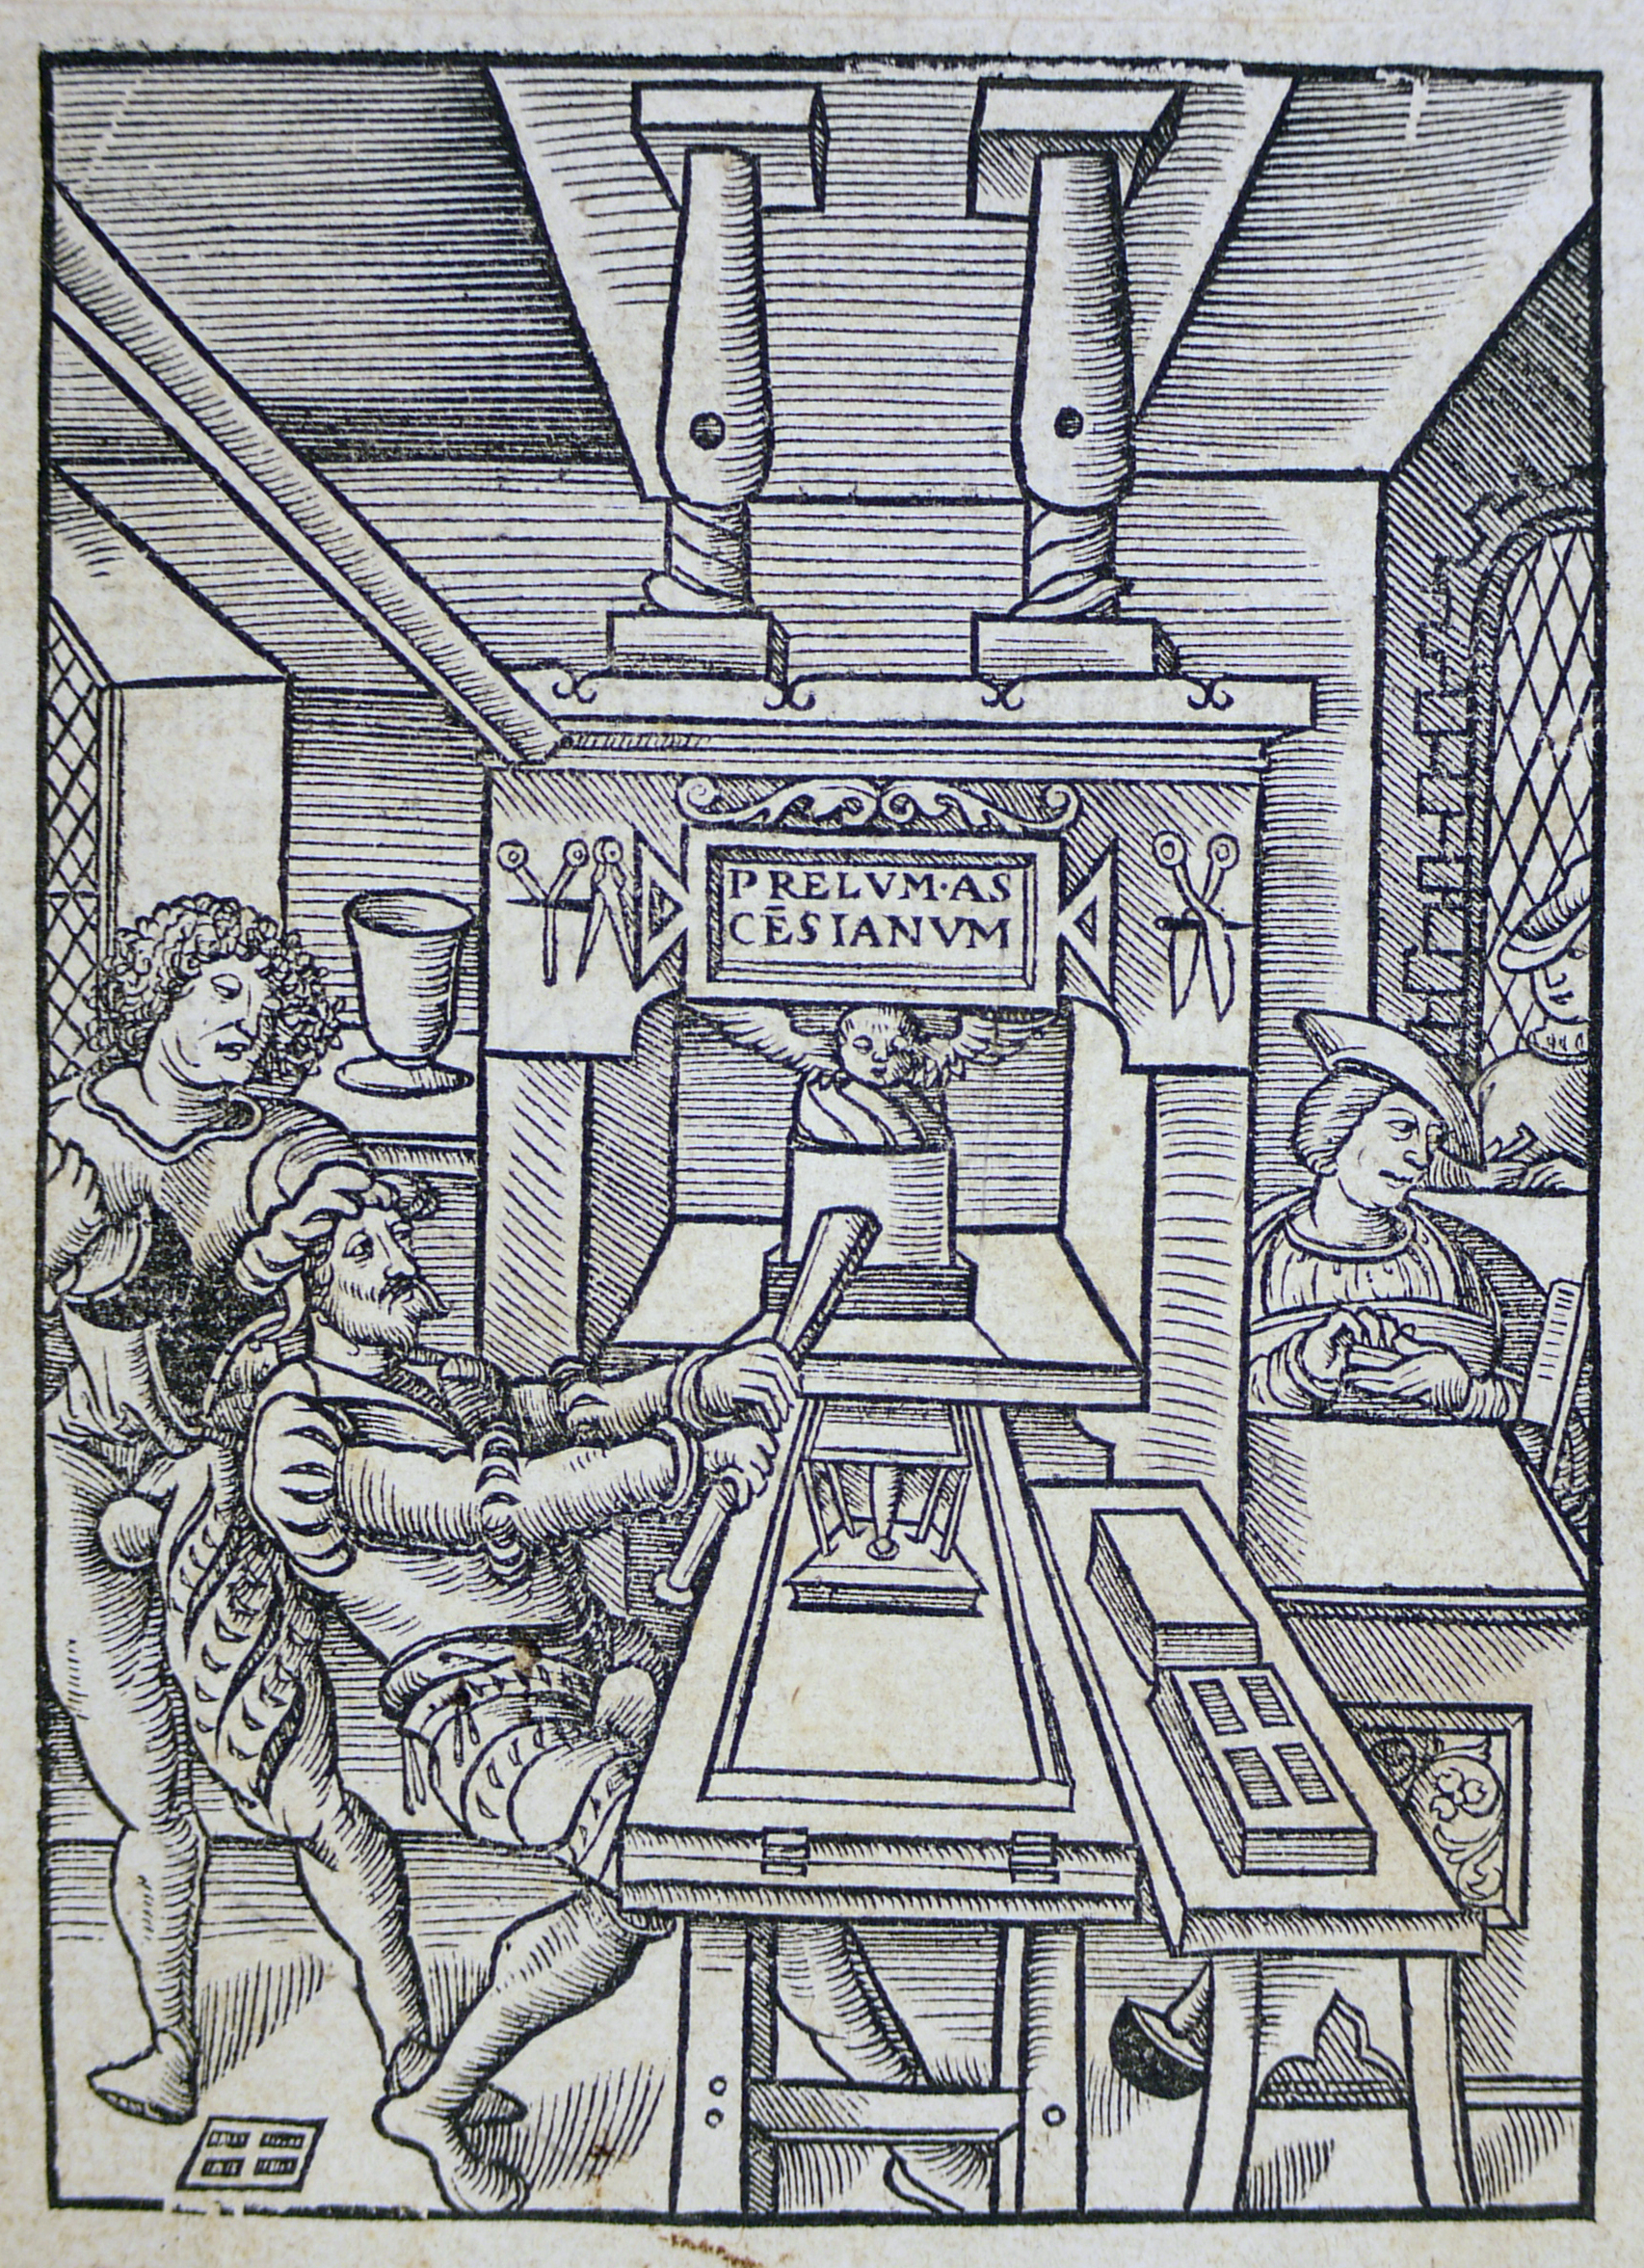 An illustration of an old printing press.